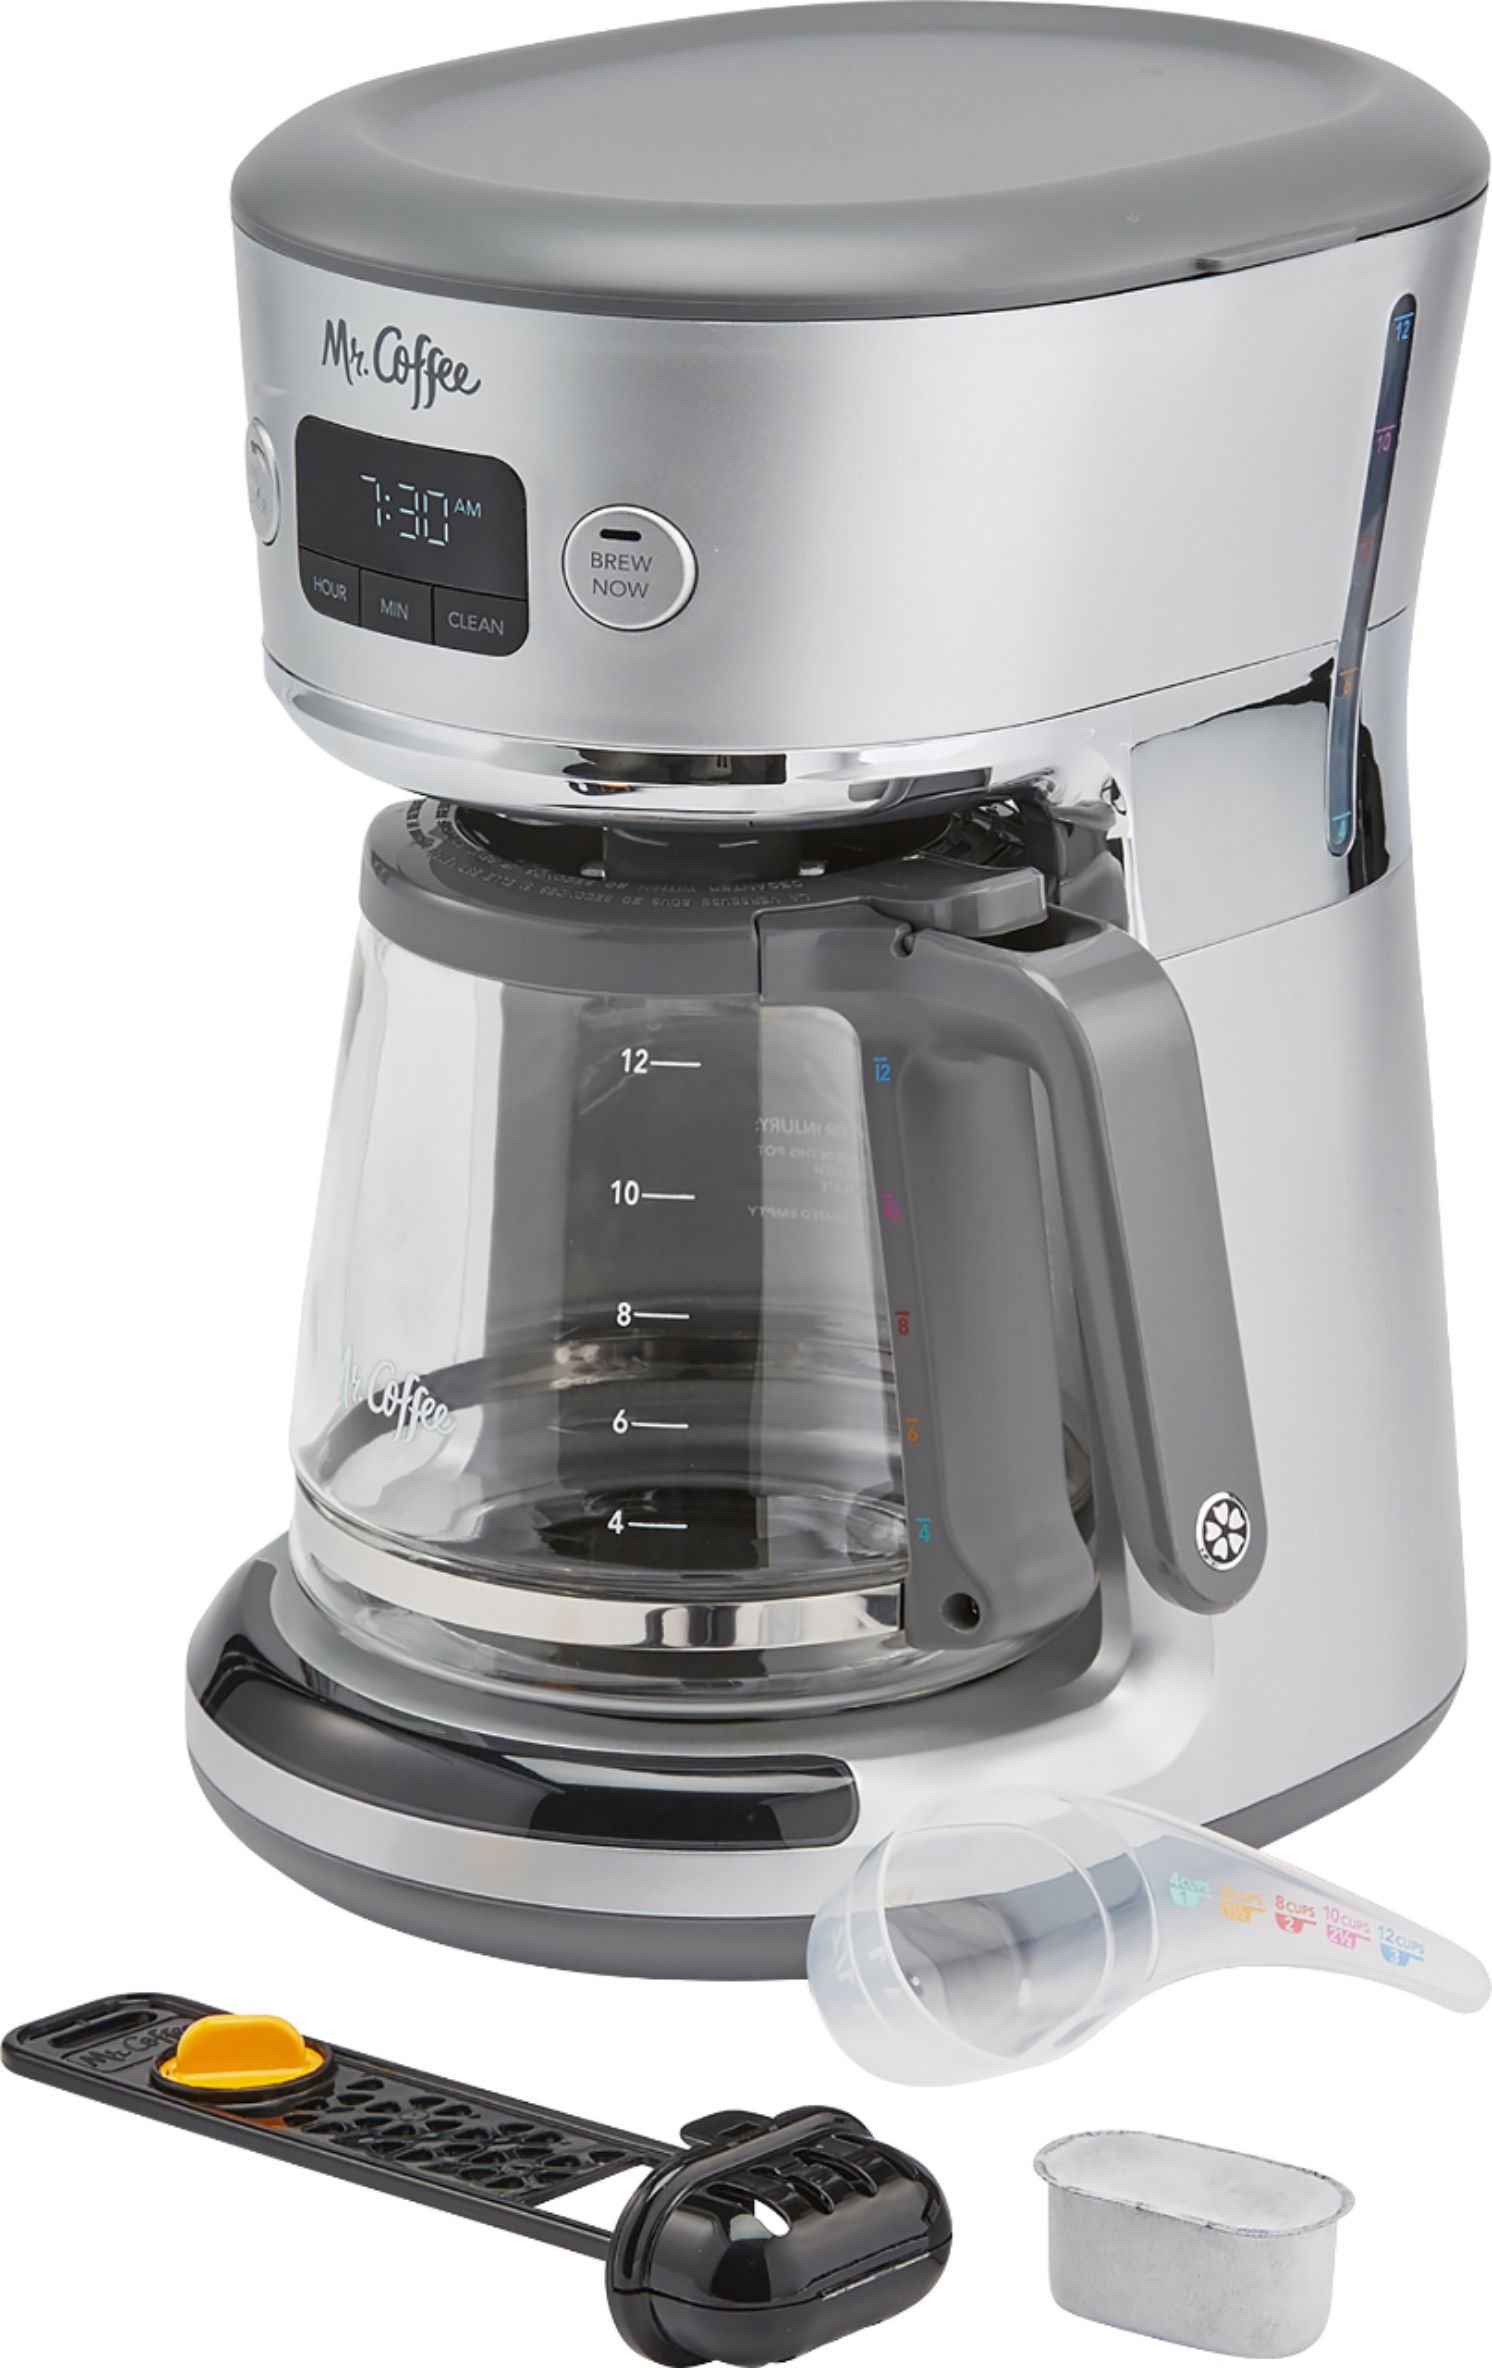 Mr. Coffee 12-Cup Programmable Drip Coffee Maker with Strong Brew, Silver